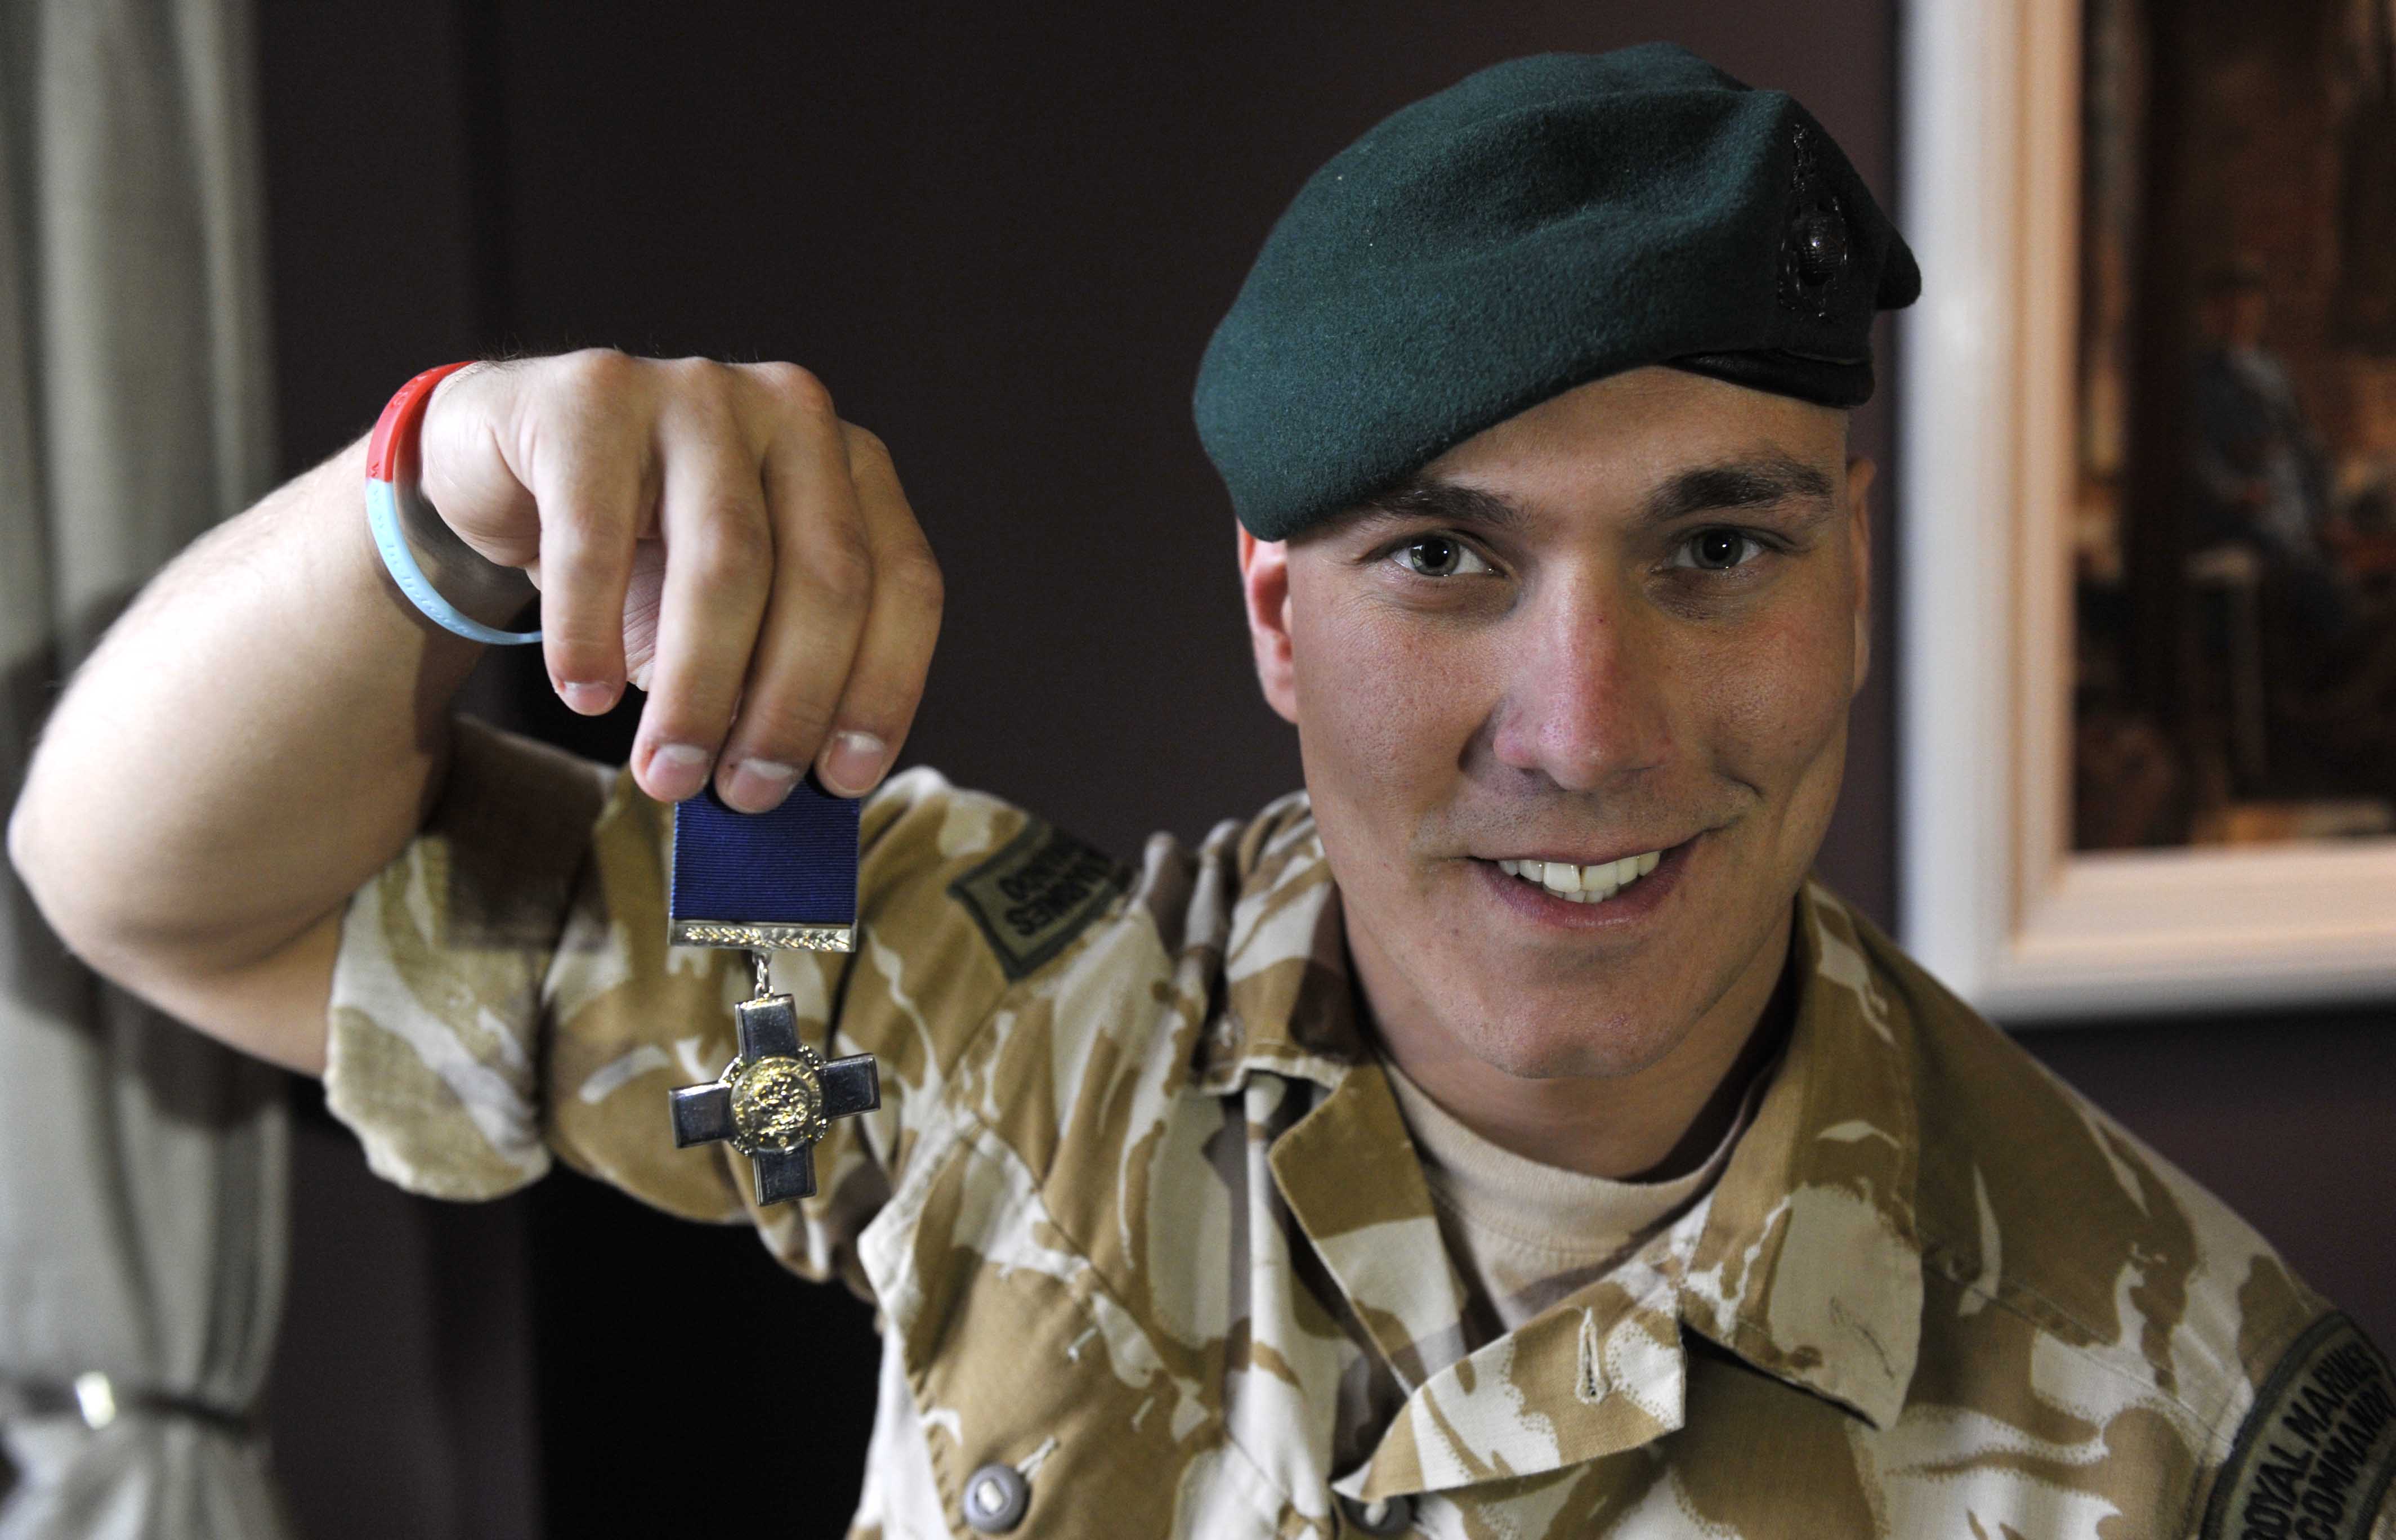 The soldier threw himself onto a tripware grenade in Afghanistan to save others around him